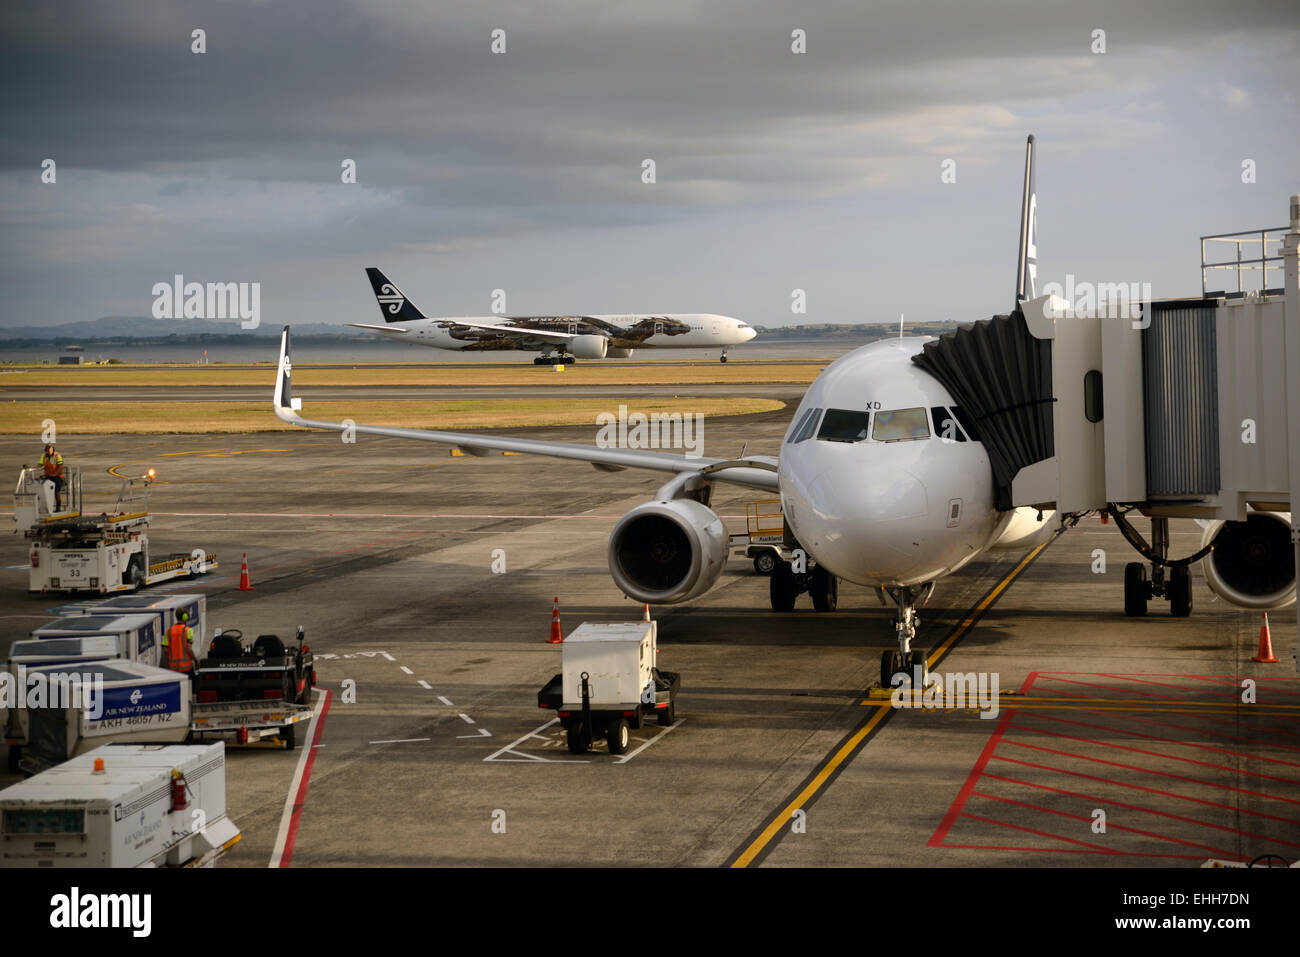 AUCKLAND, NEW ZEALAND, JANUARY 23, 2015: An Air New Zealand jet takes off from Auckland Airport Stock Photo